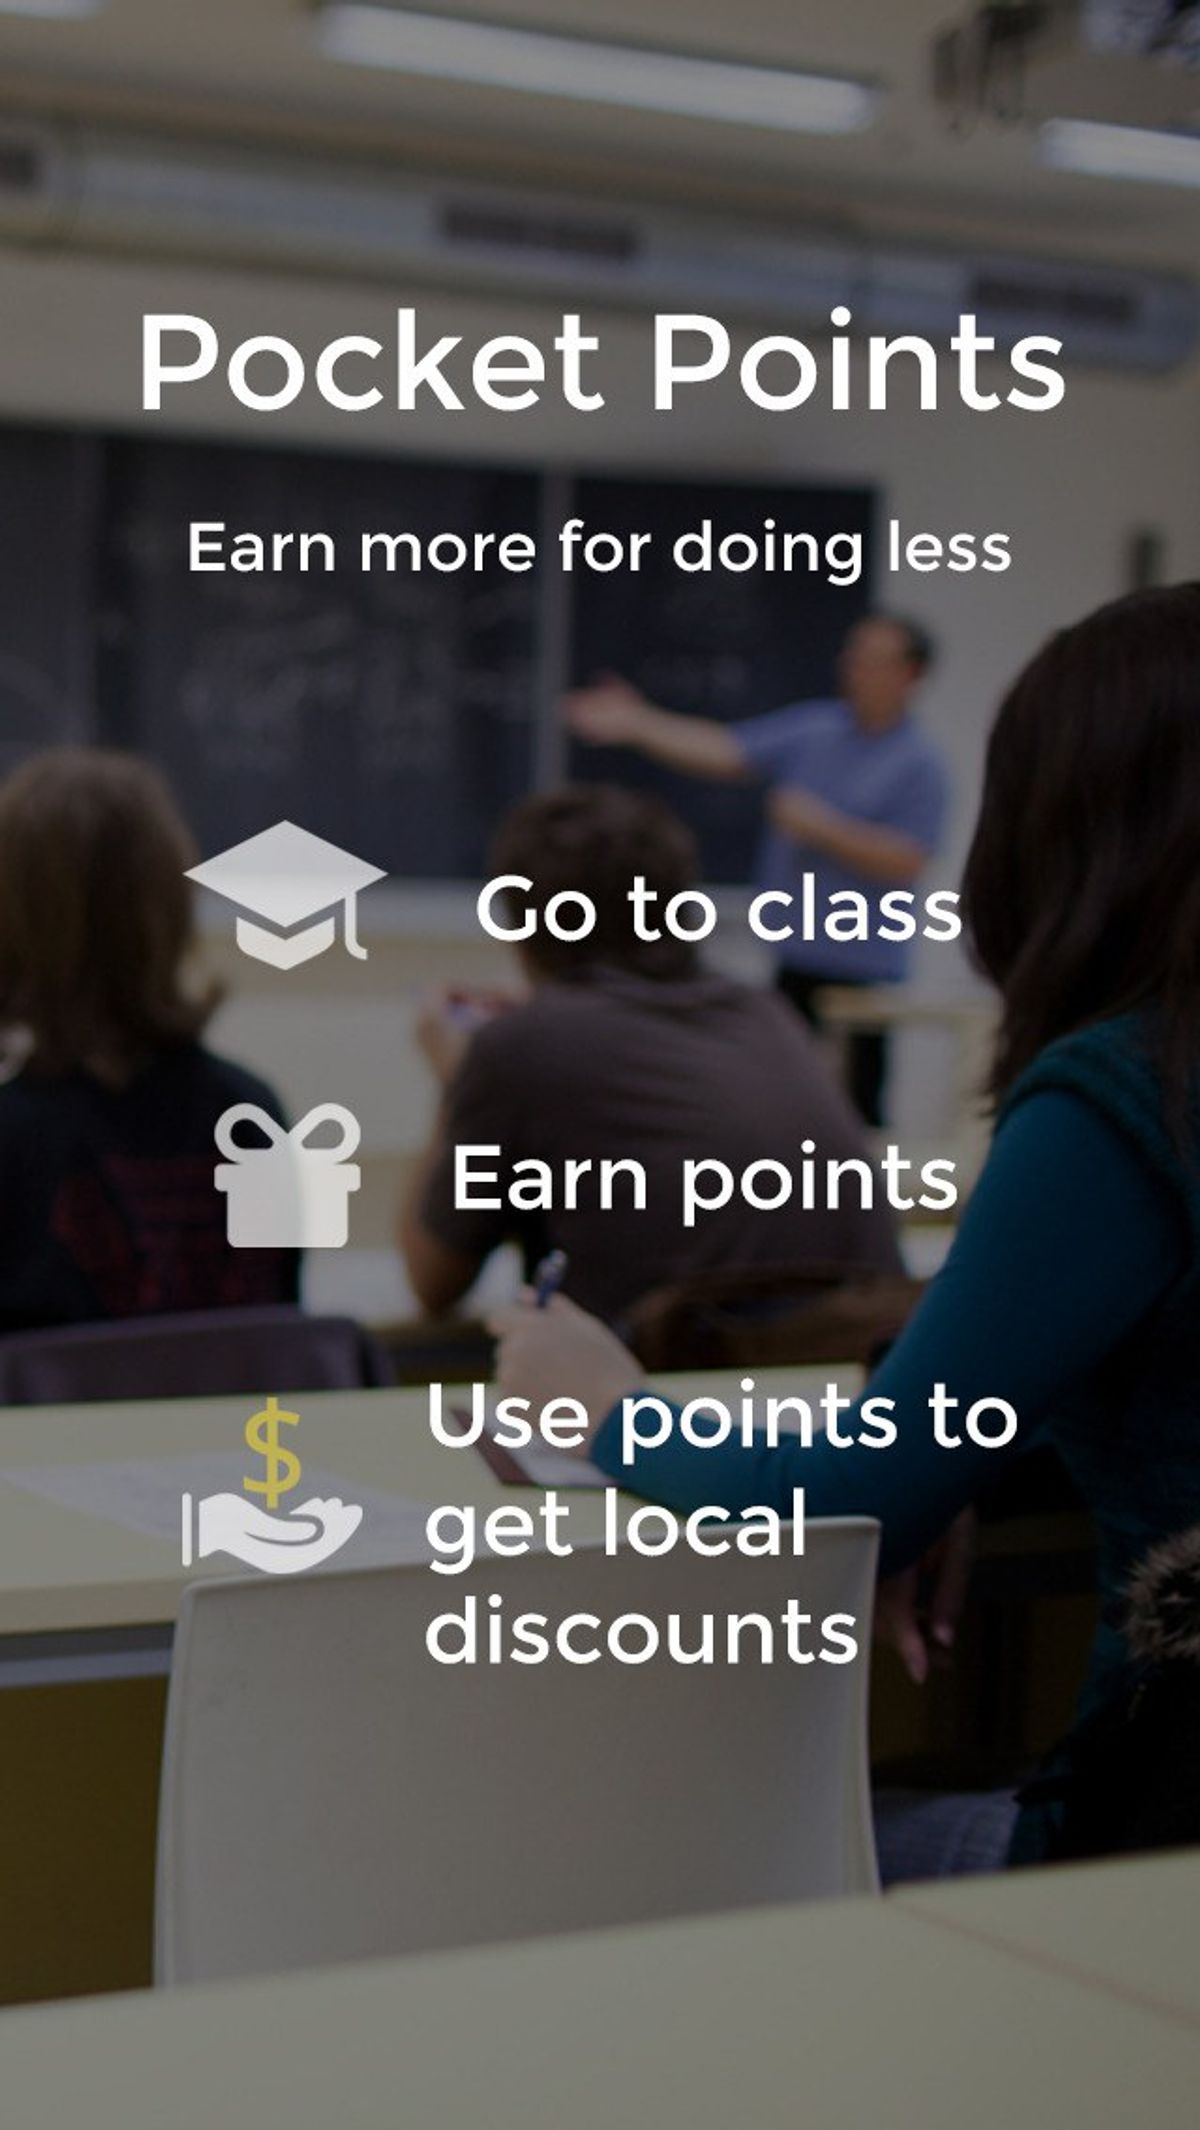 Earn Free Food and More by Going to Class